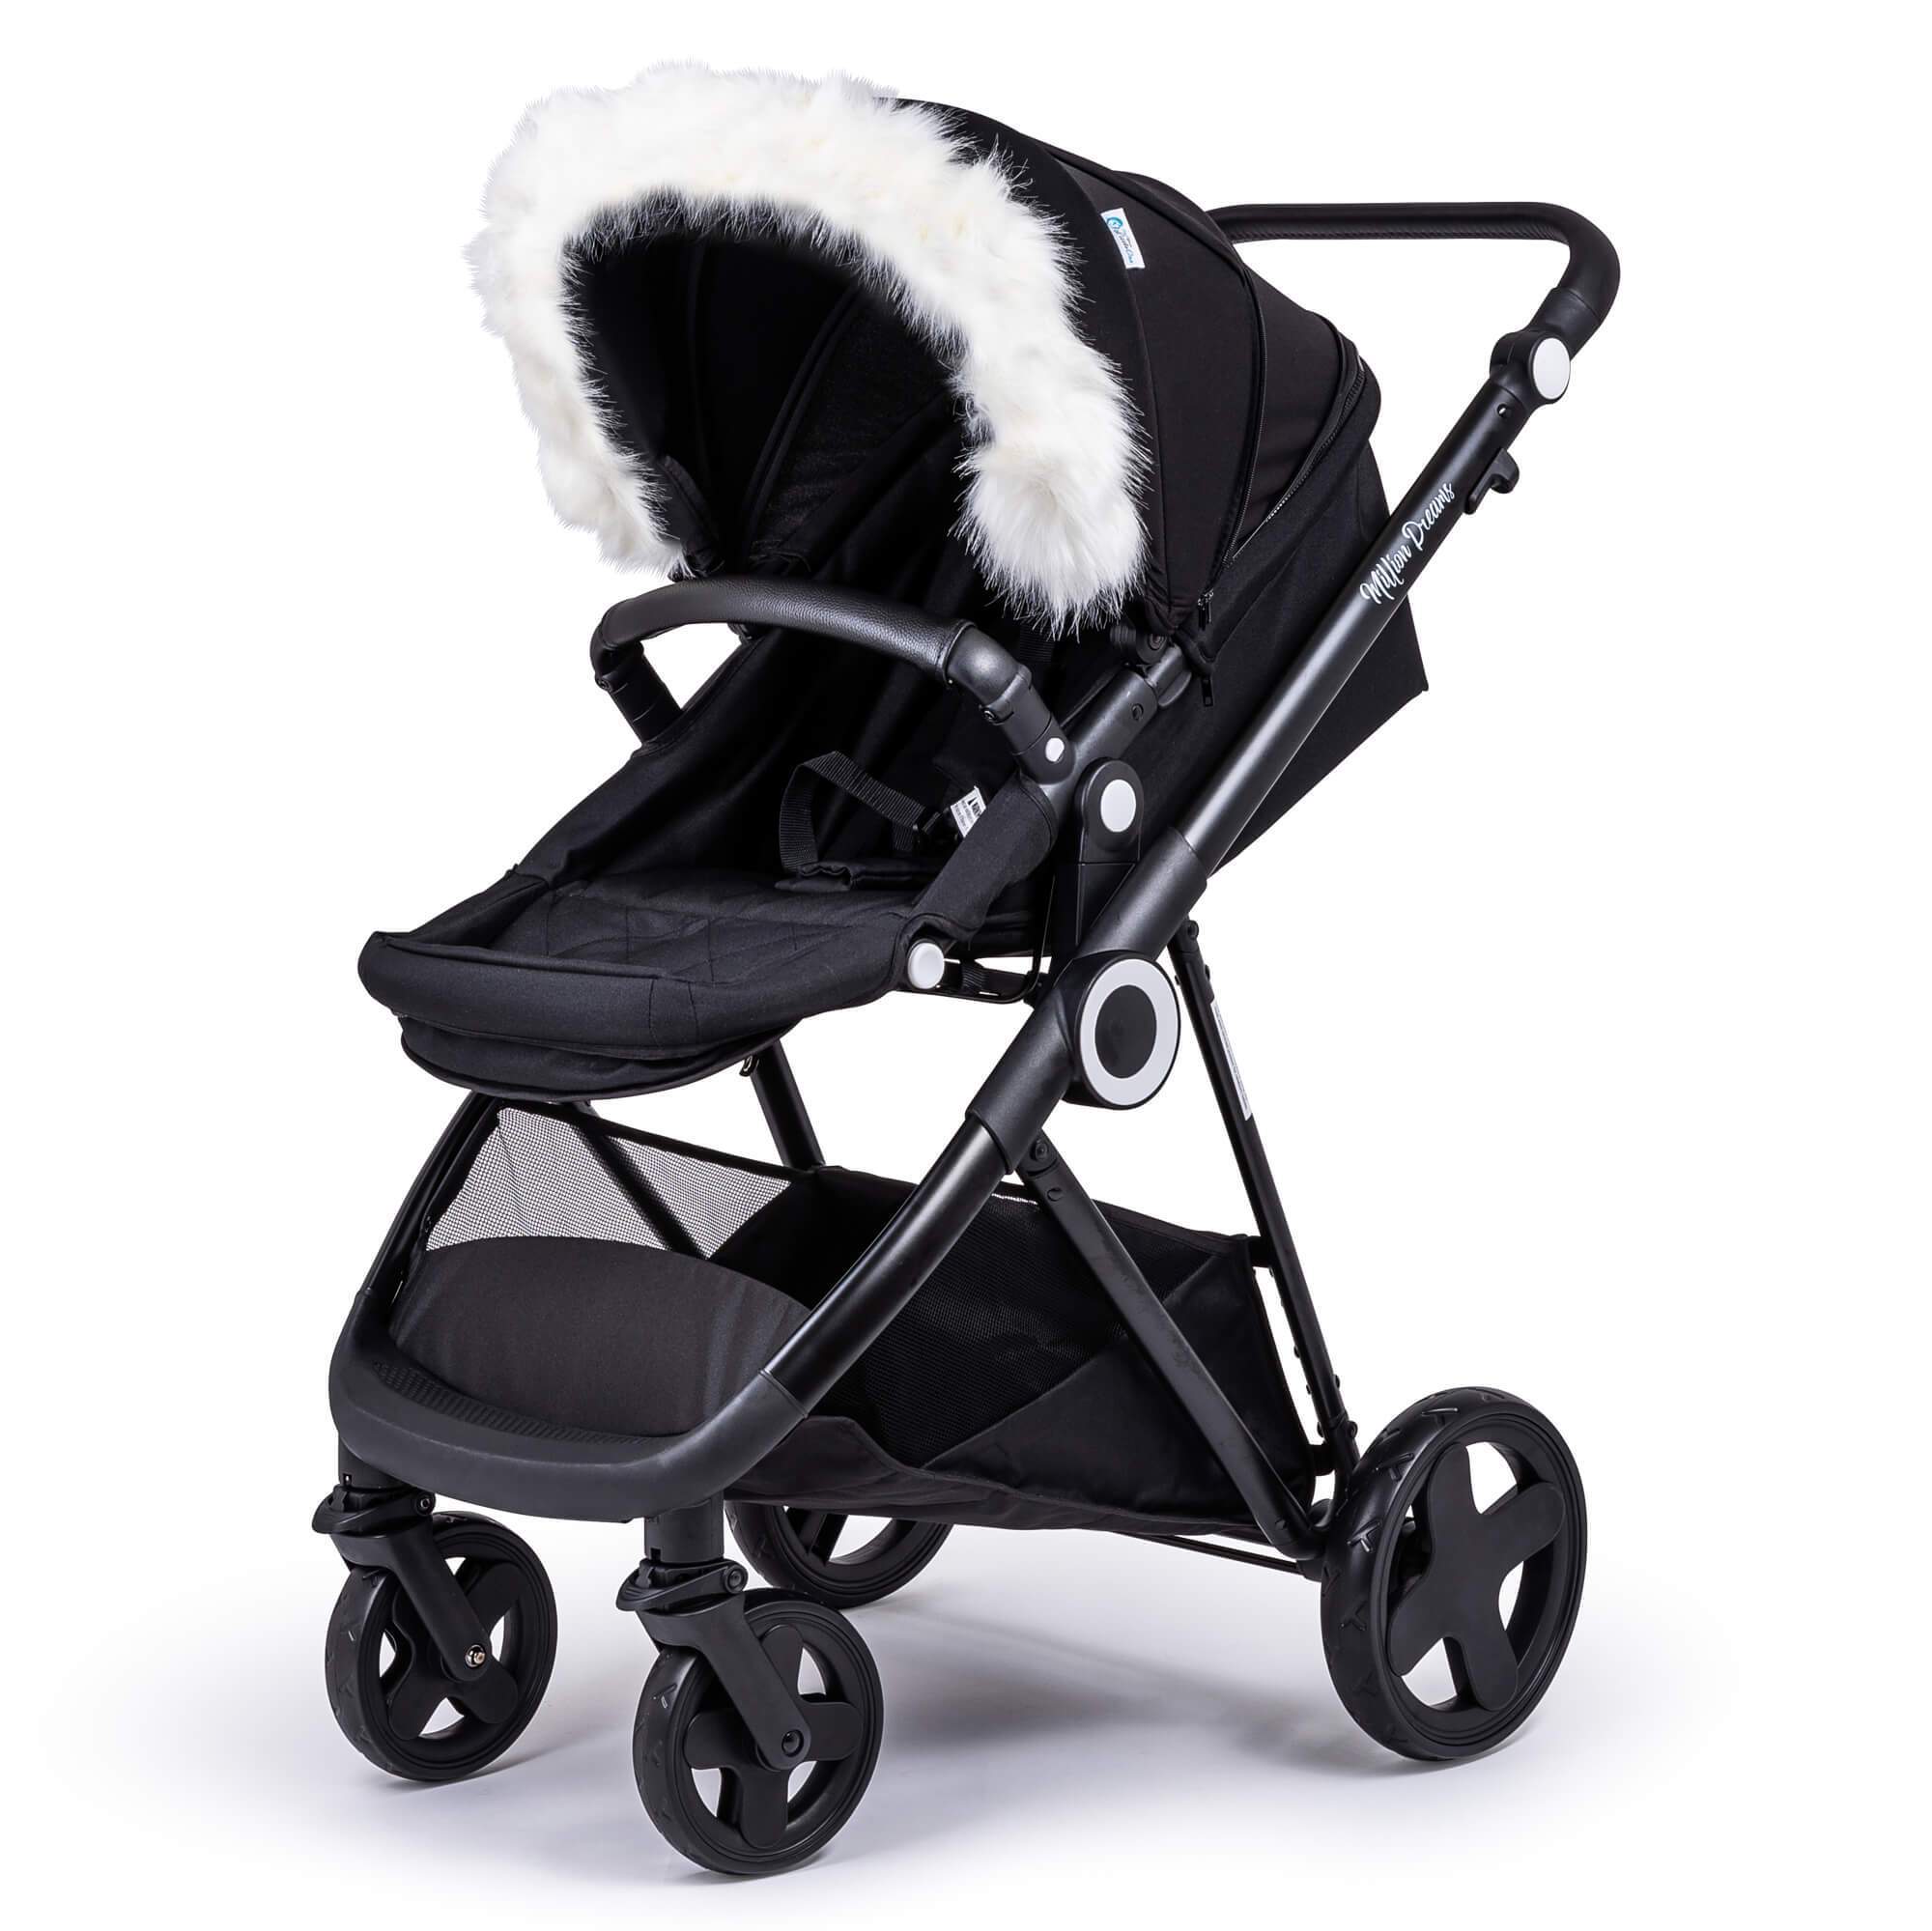 Pram Fur Hood Trim Attachment for Pushchair Compatible with Babylo - White / Fits All Models | For Your Little One